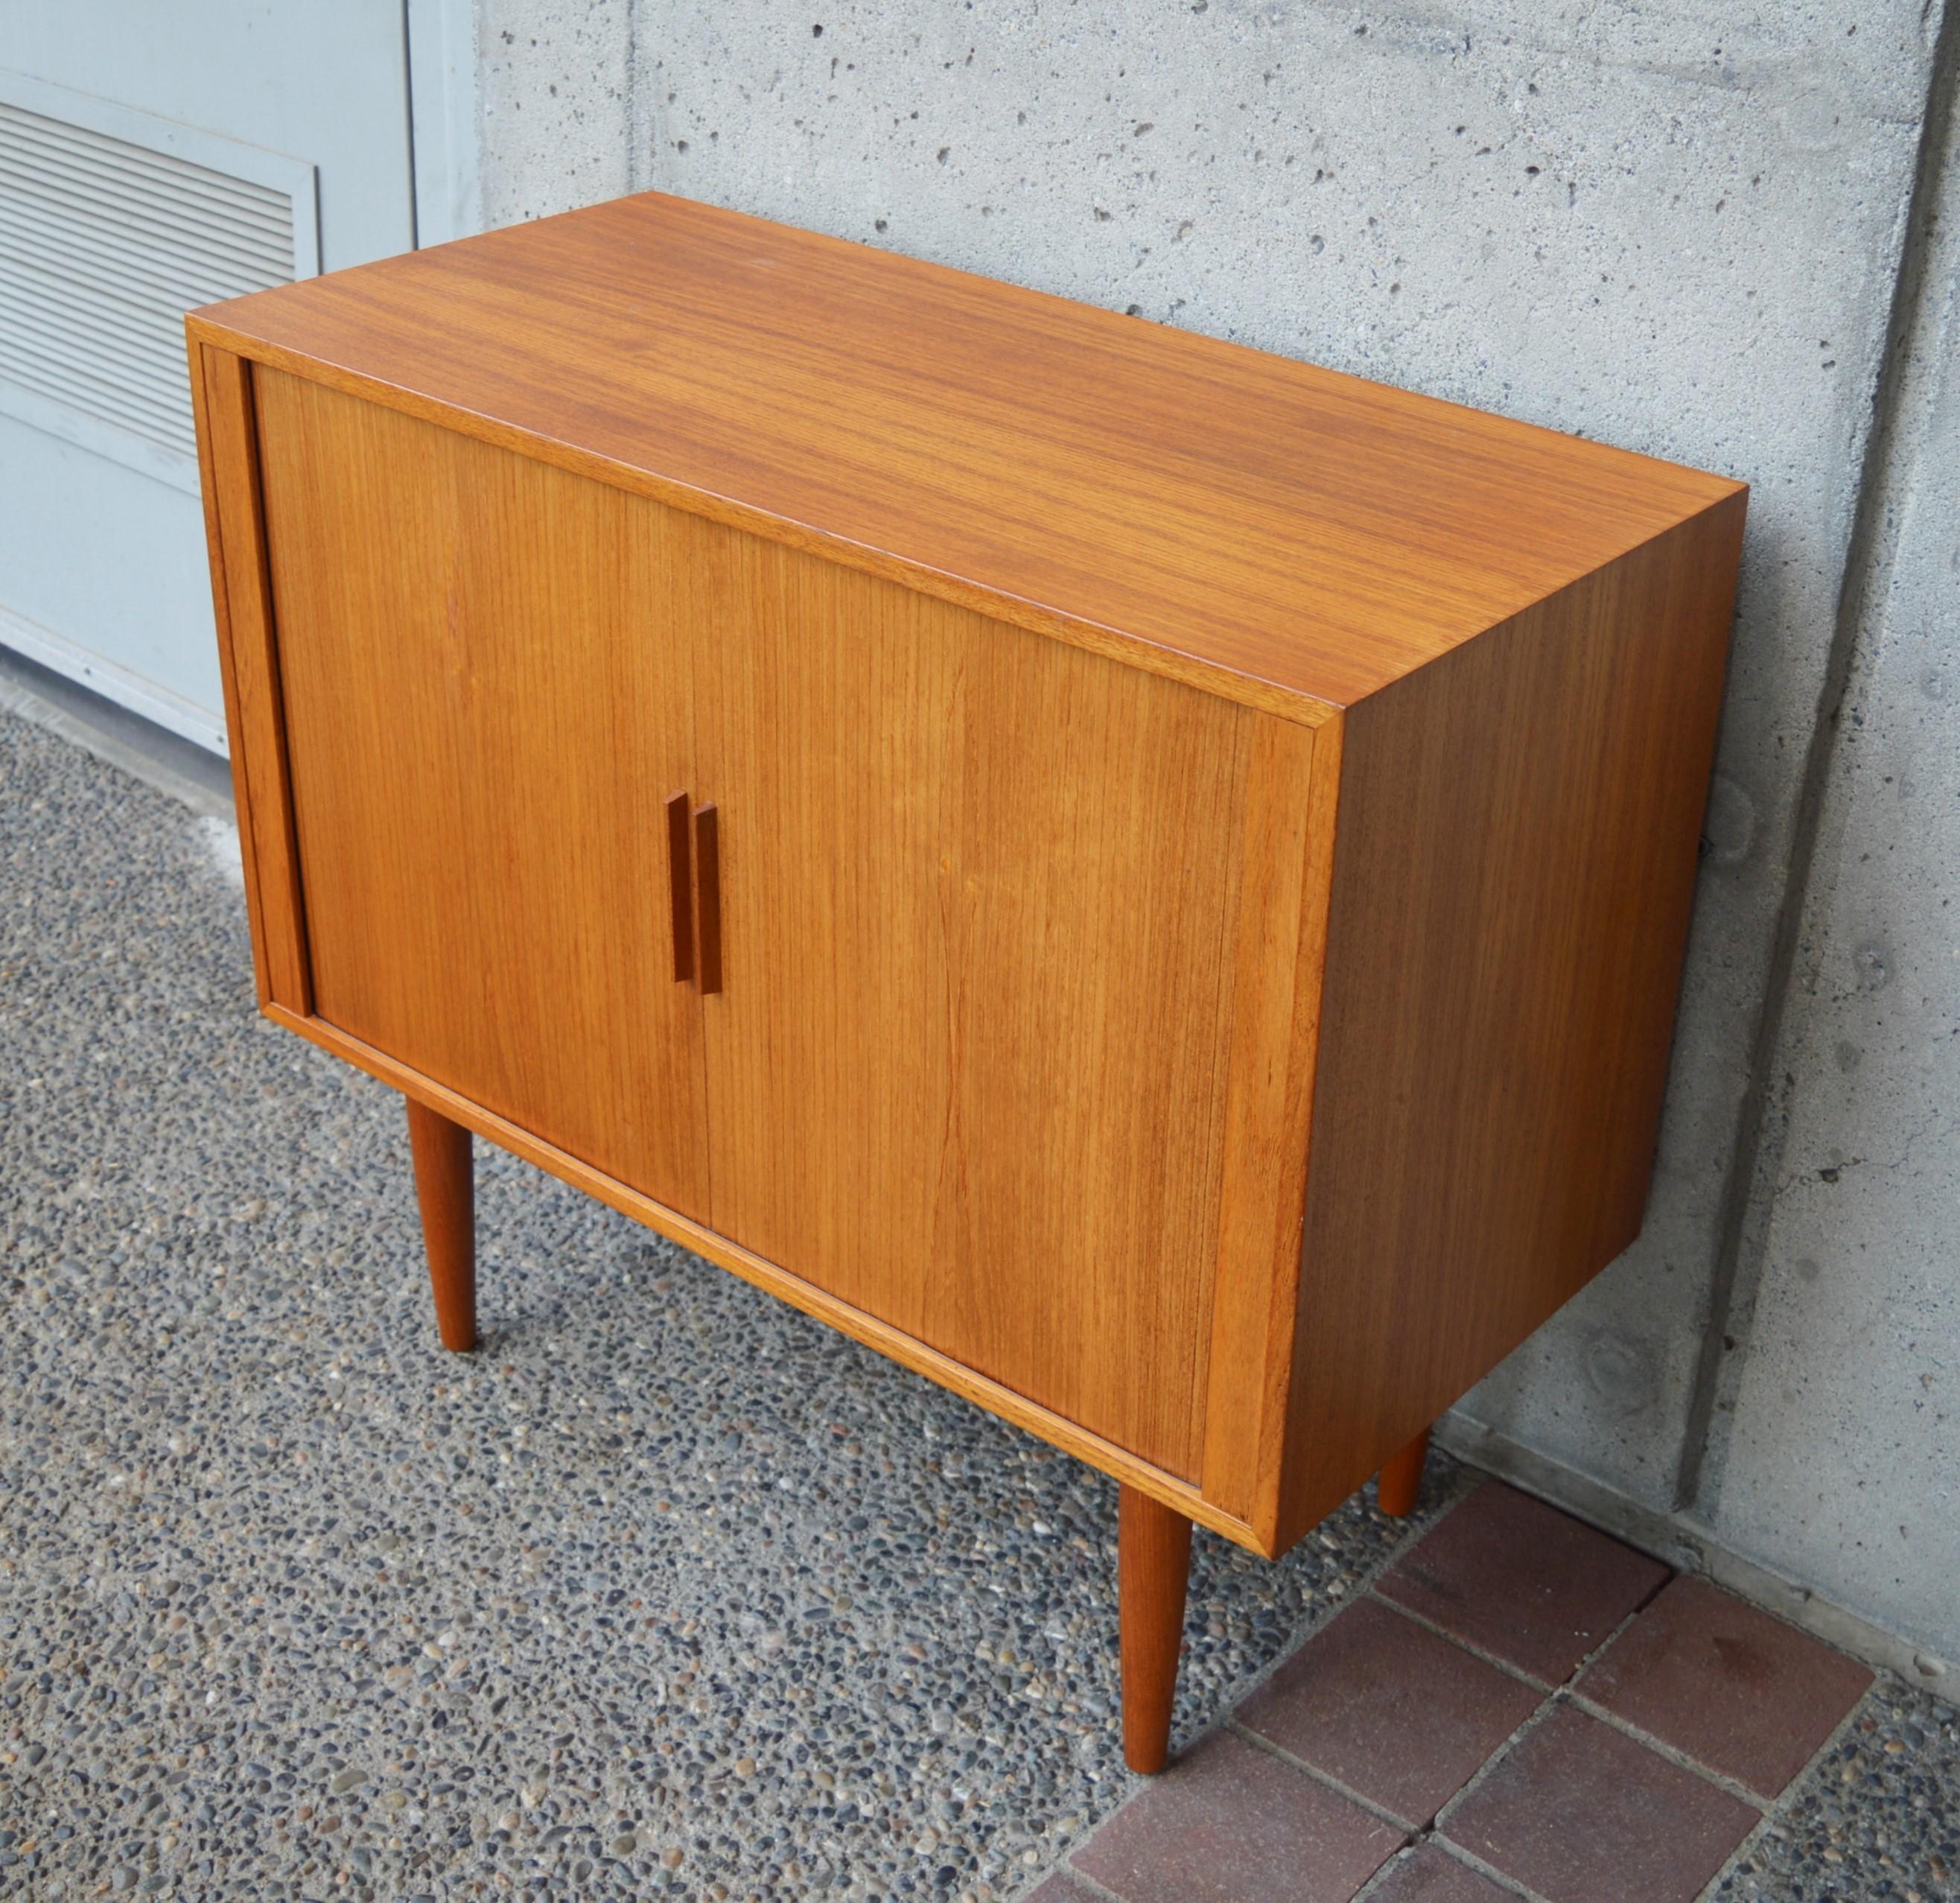 This hot Danish modern teak cabinet / credenza was designed by Kai Kristiansen for Feldballes Møbelfabrik in the 1960s. Featuring tambour doors that disappear inside the cabinet when opened and which have slim contoured door pulls. The interior is